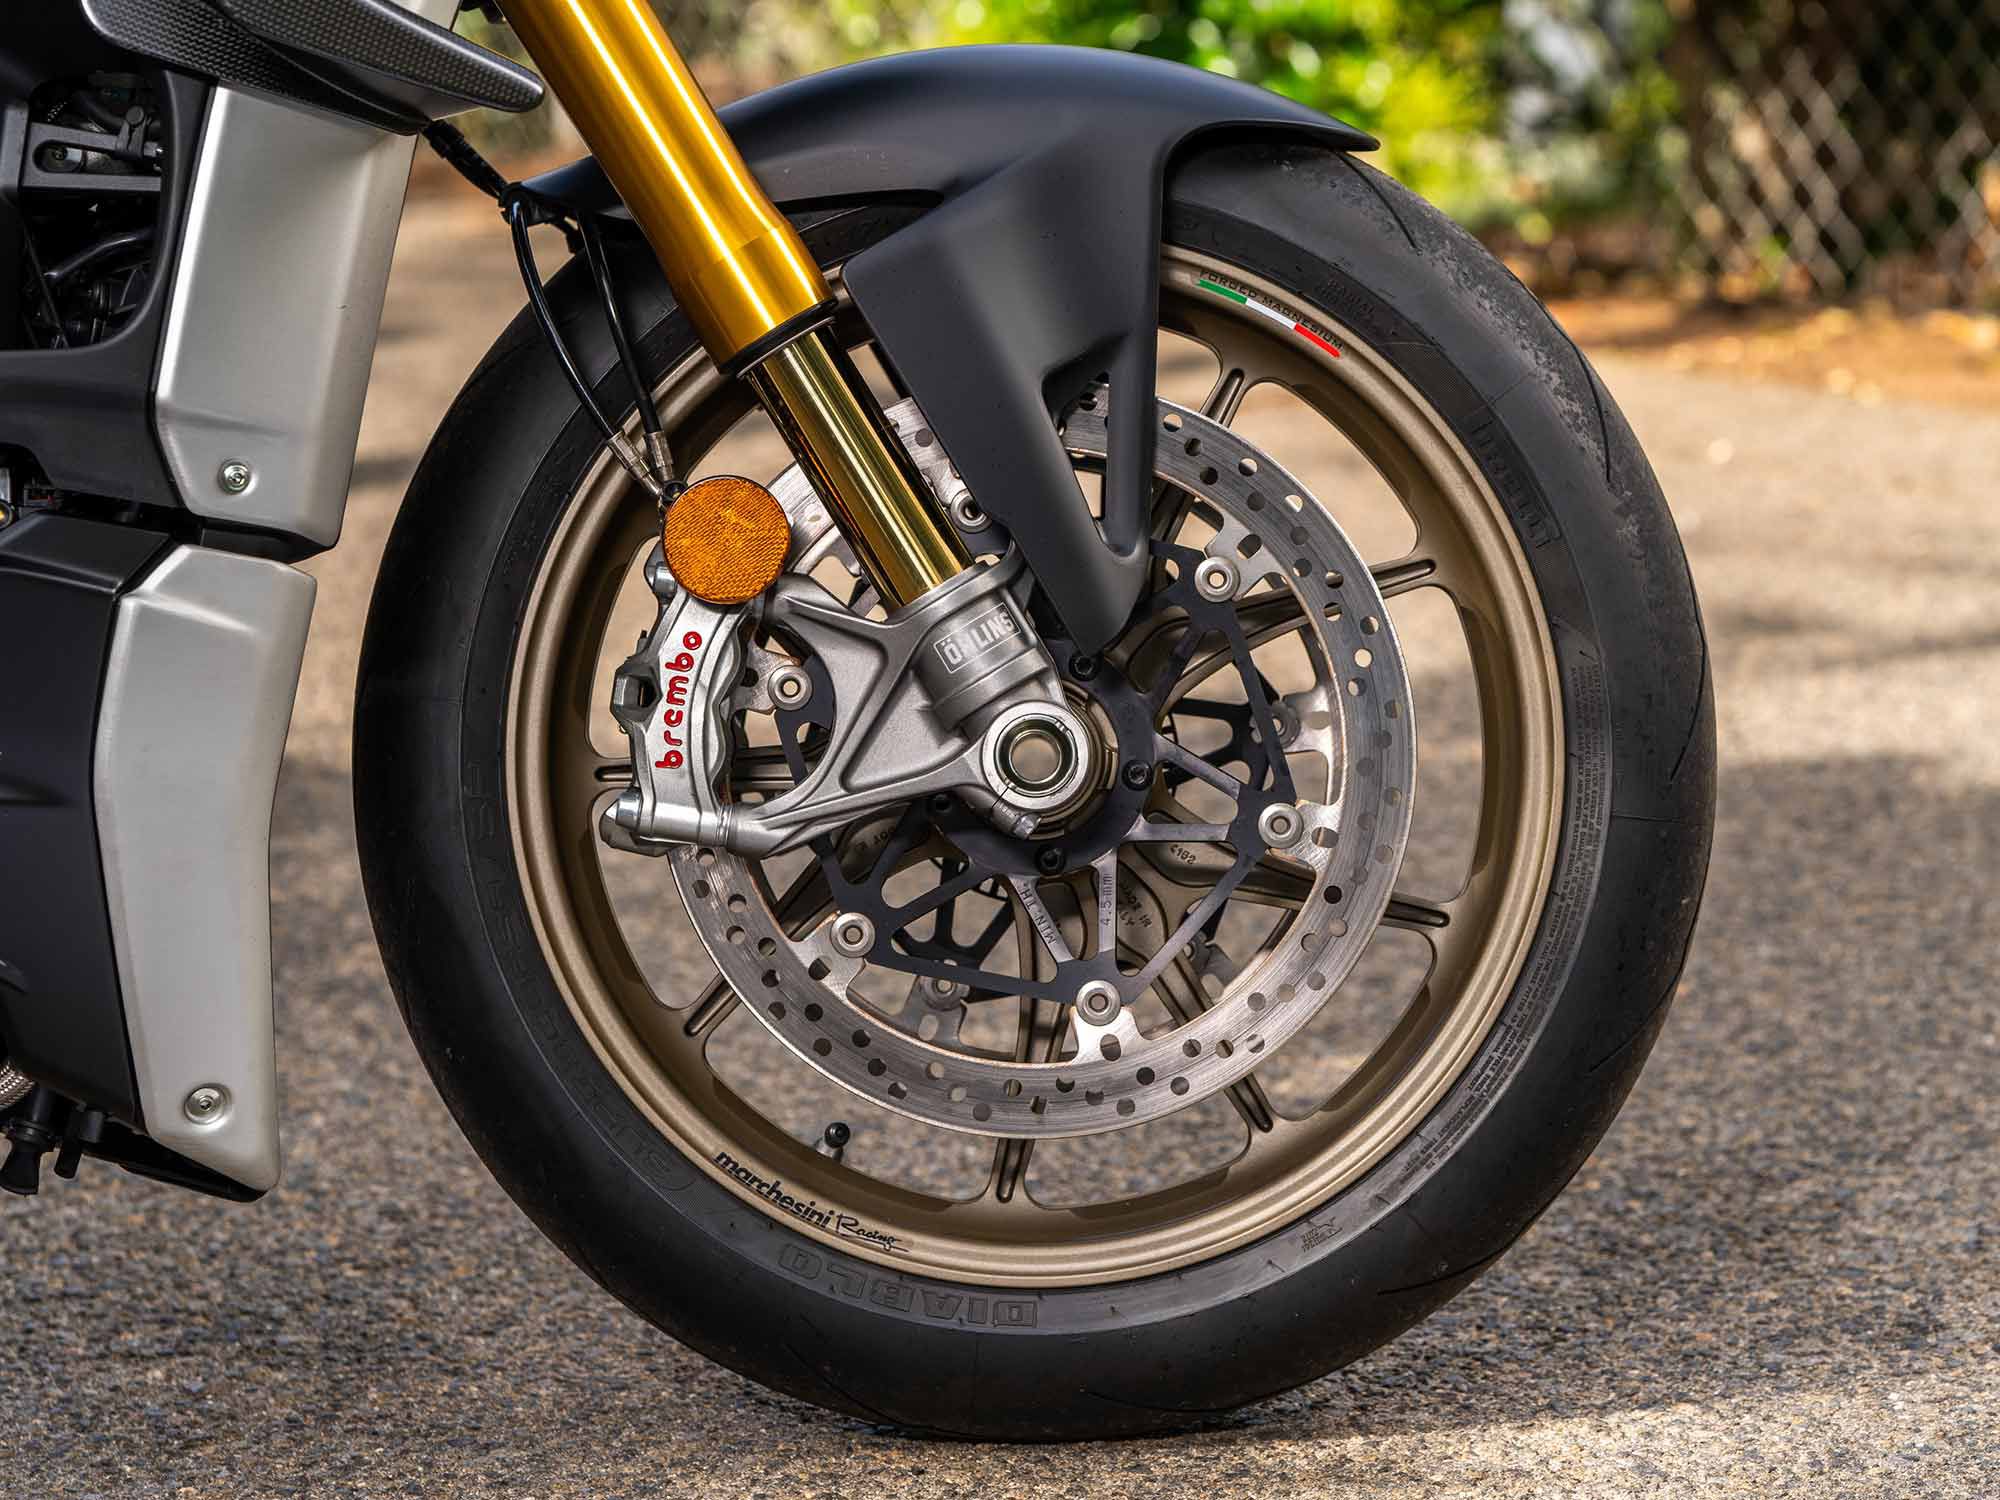 This Streetfighter V4 S project bike rolls on a set of forged magnesium wheels from Marchesini ($5,227.50). The wheels are 1.5 pounds lighter than the forged alloy setup on the V4 S.